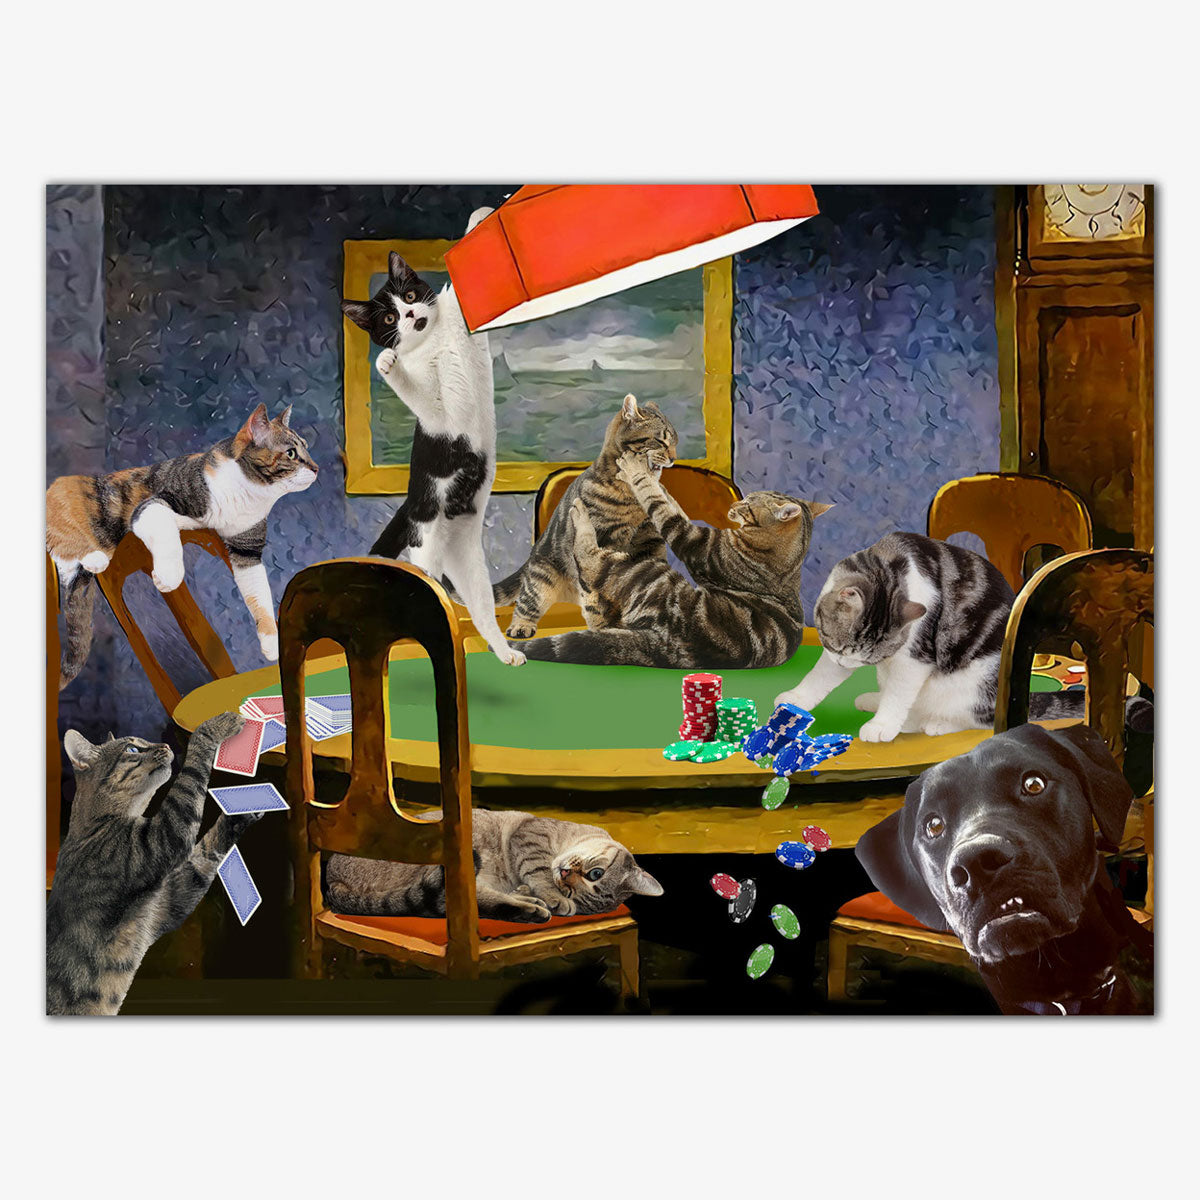 "Cats(not)Playing Poker" by Nancy Sterling